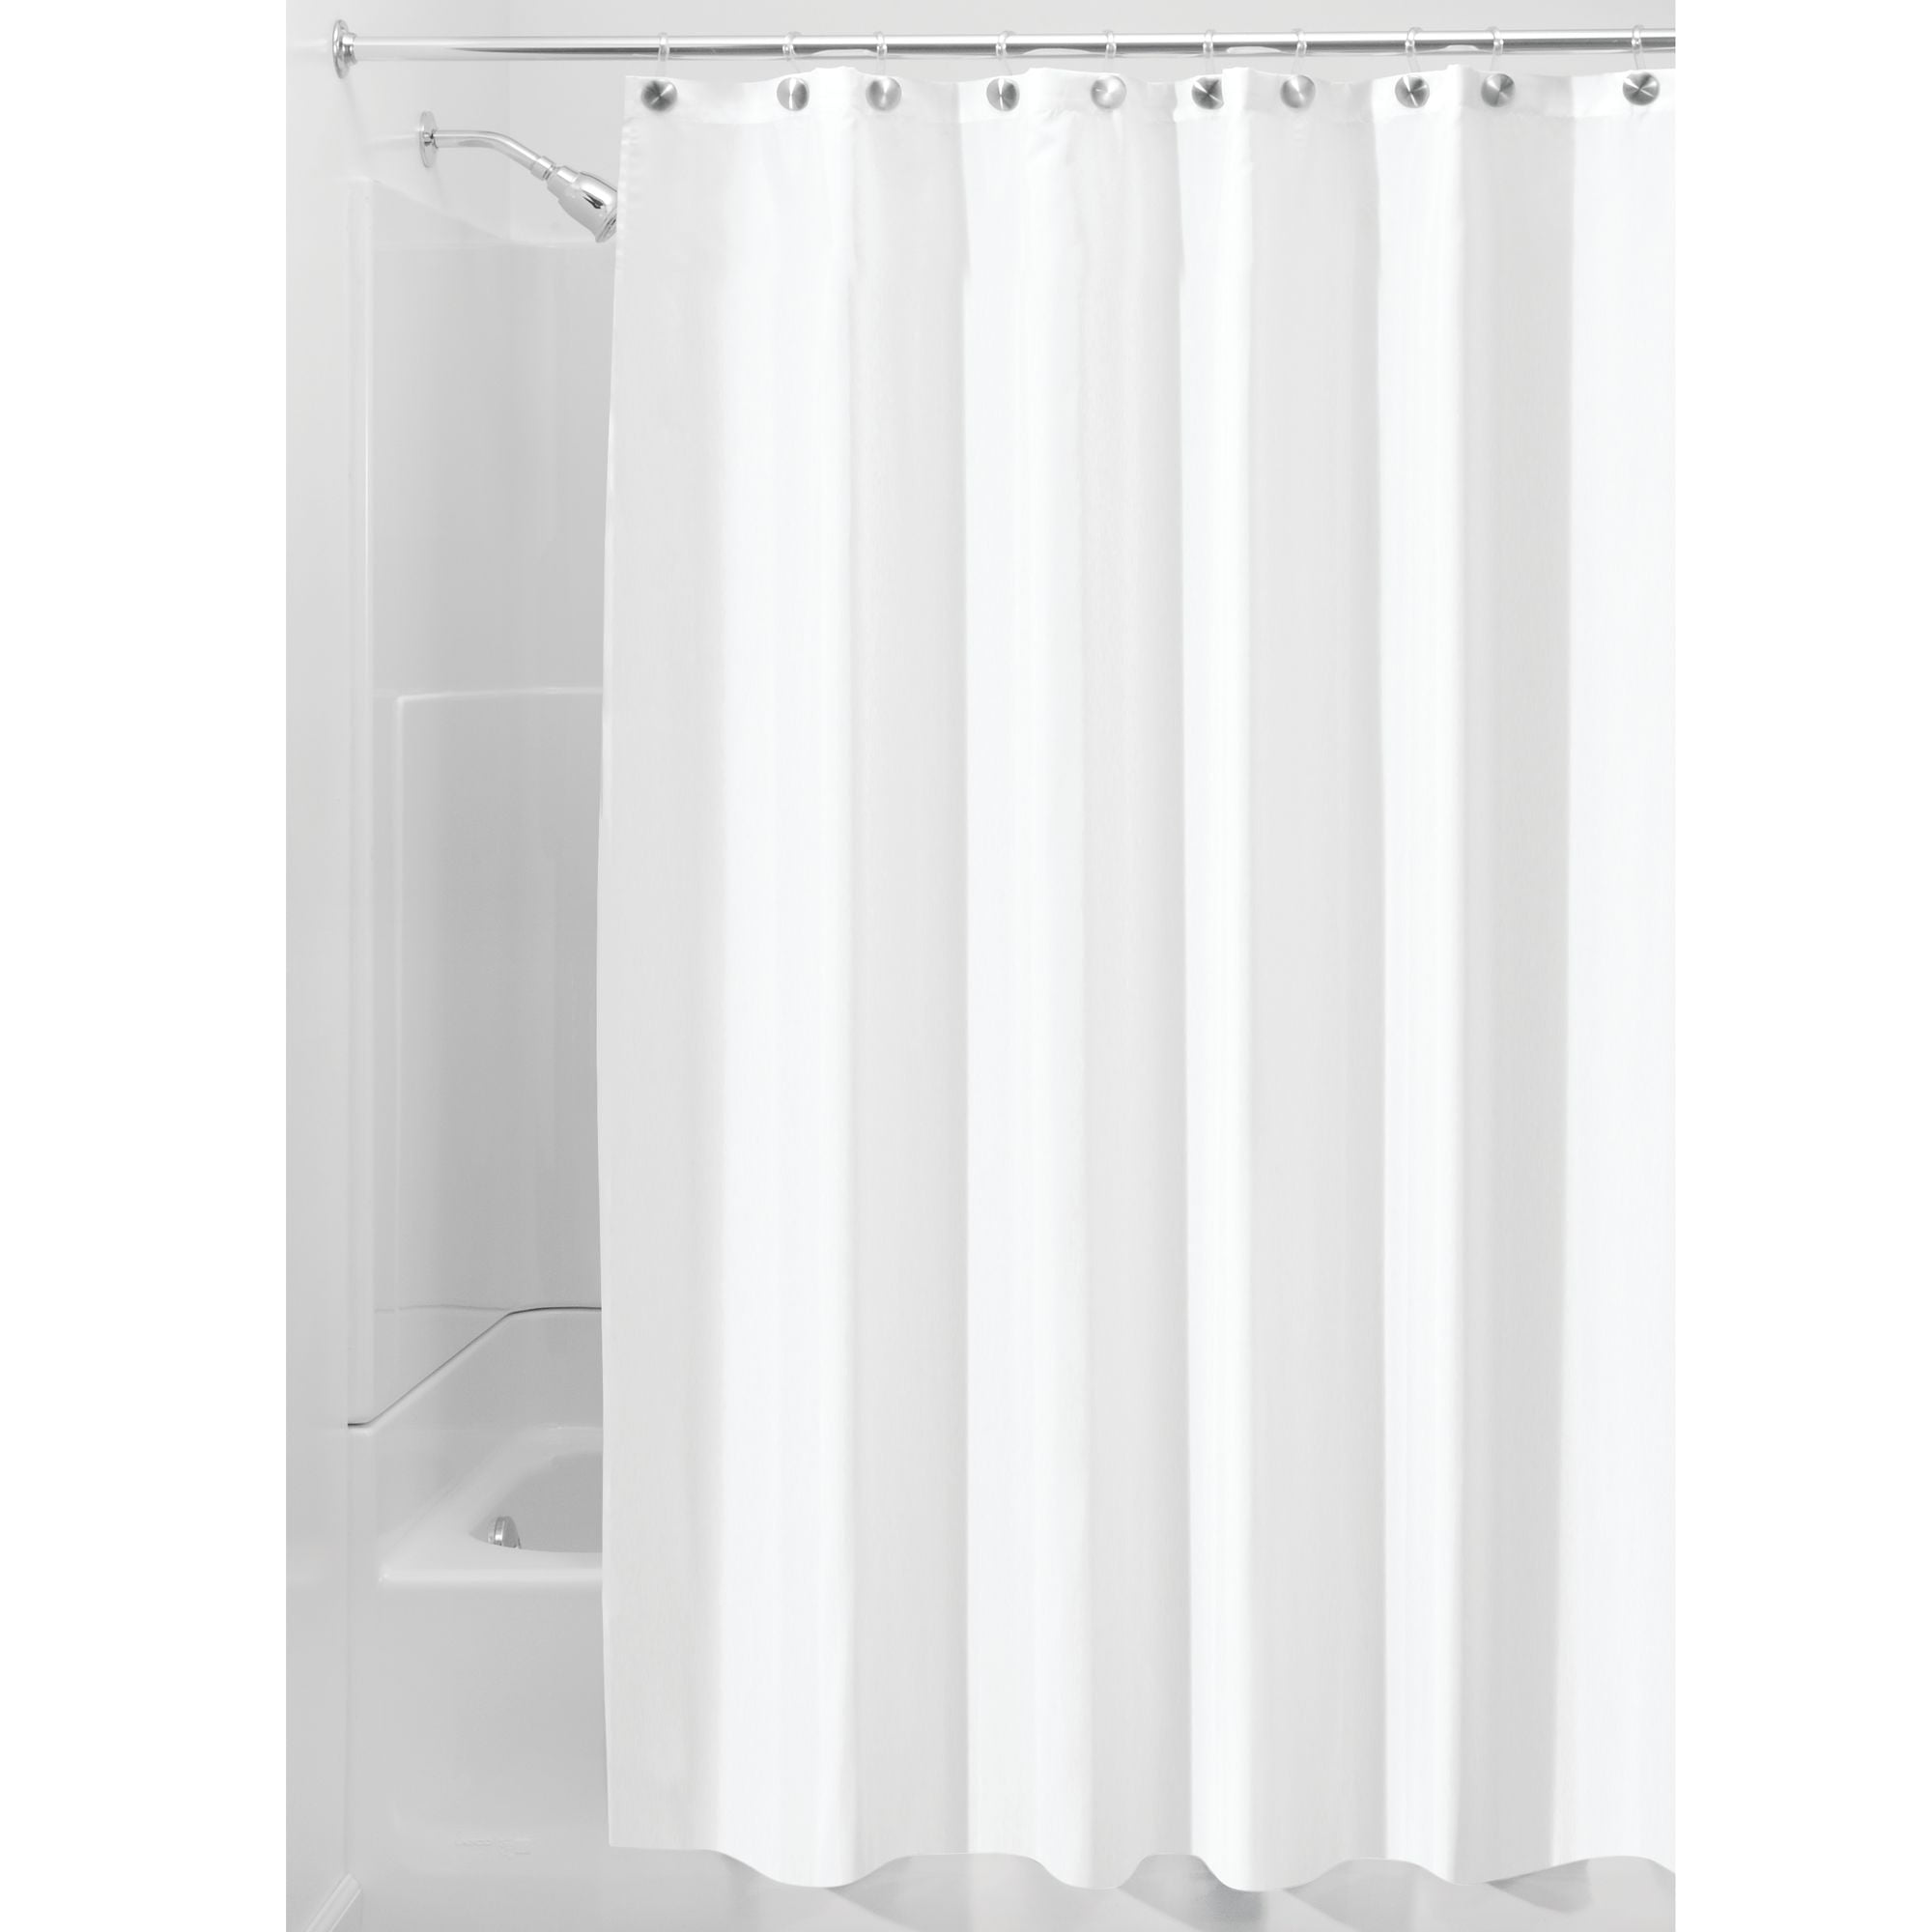 Interdesign Waterproof Fabric Shower, Extra Long And Extra Wide Fabric Shower Curtains